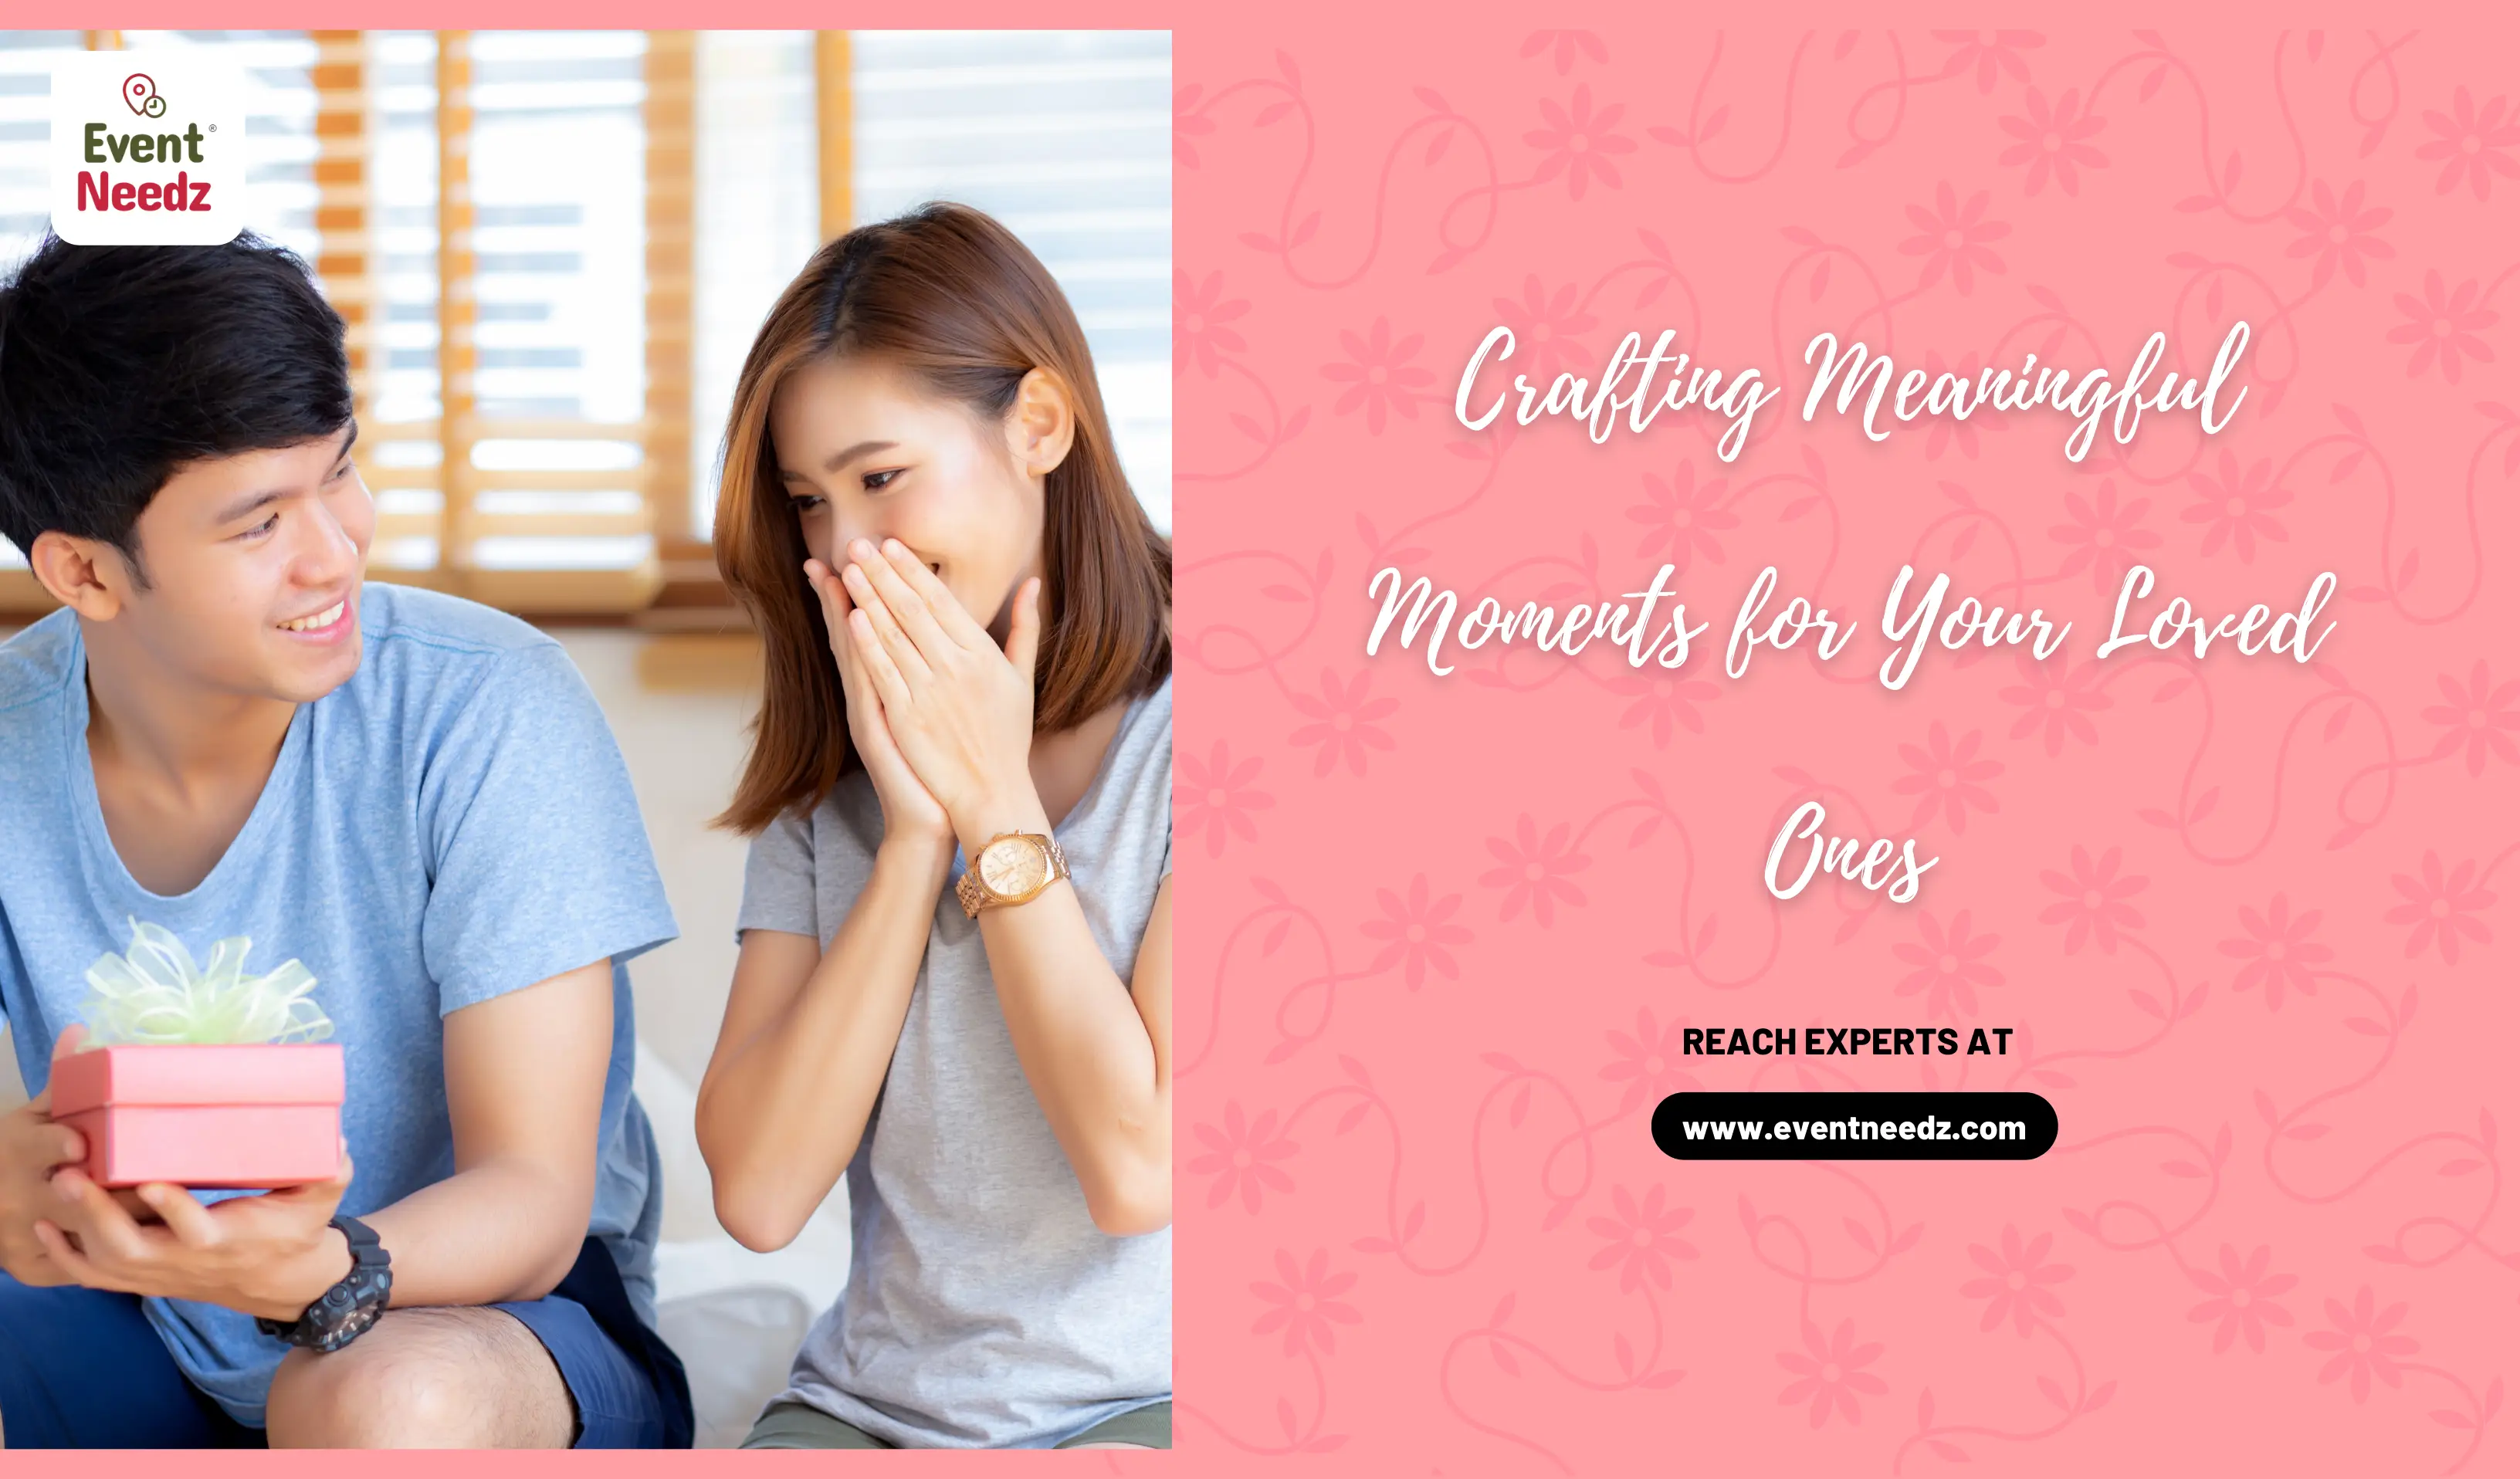 Crafting Meaningful Moments for Your Loved Ones